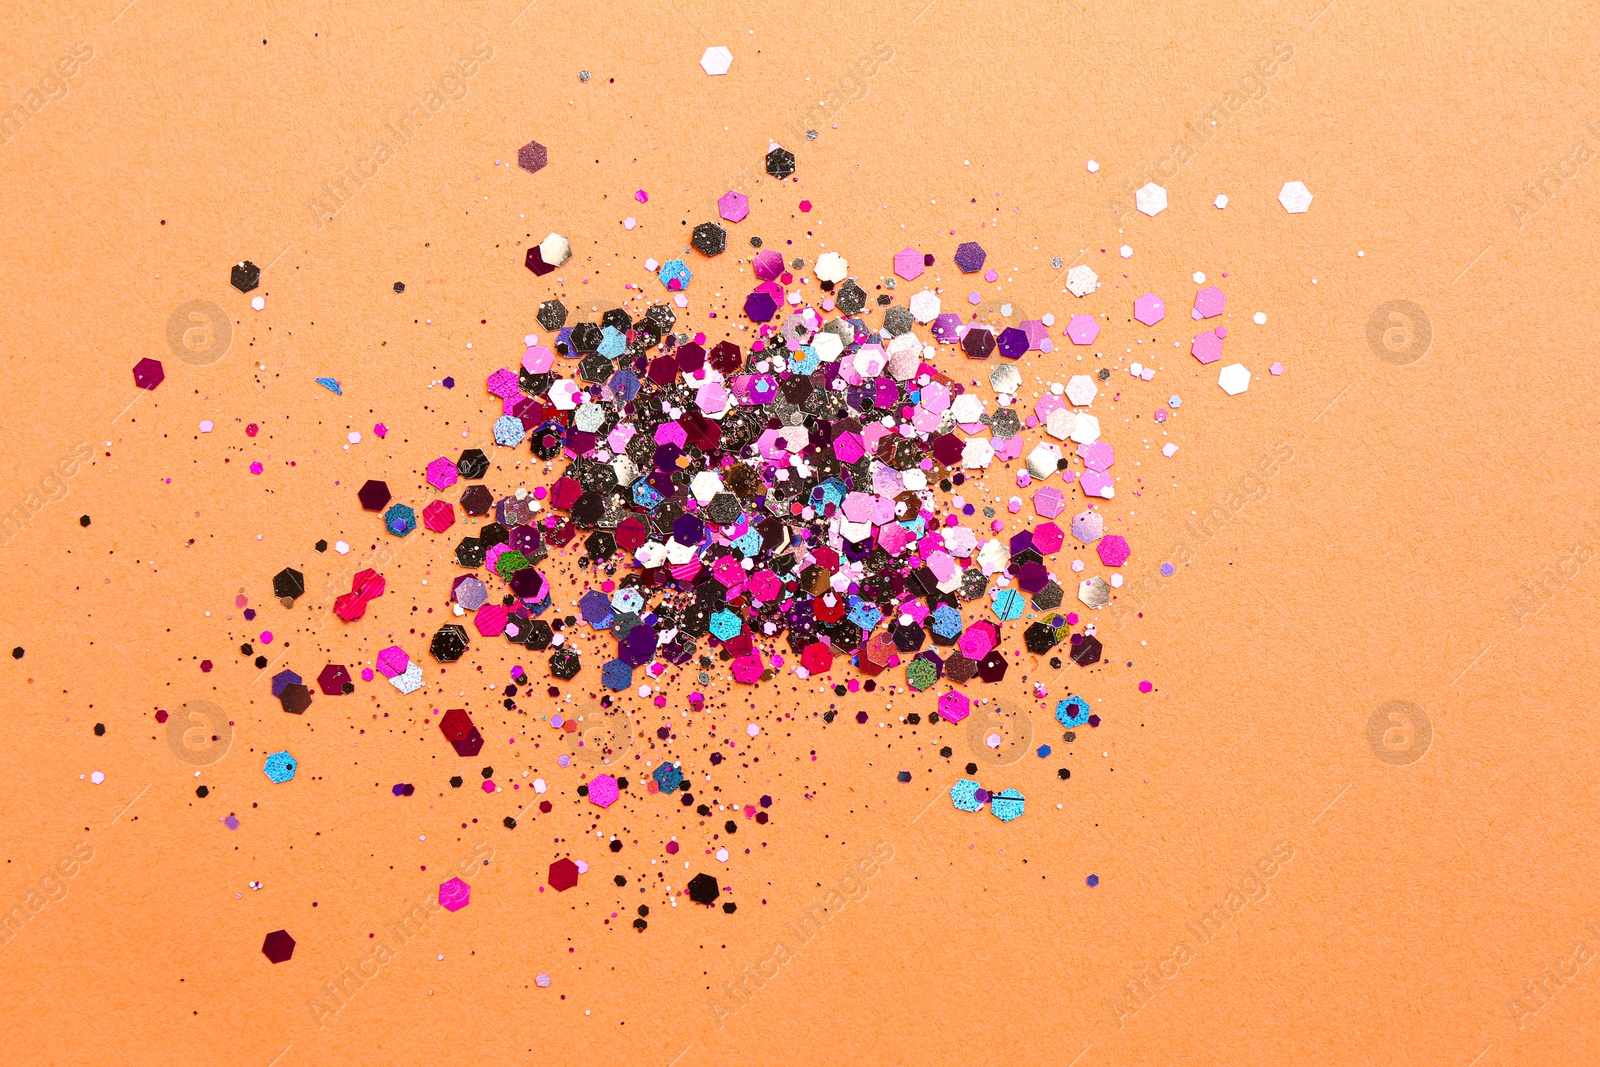 Photo of Shiny bright glitter on coral background, flat lay